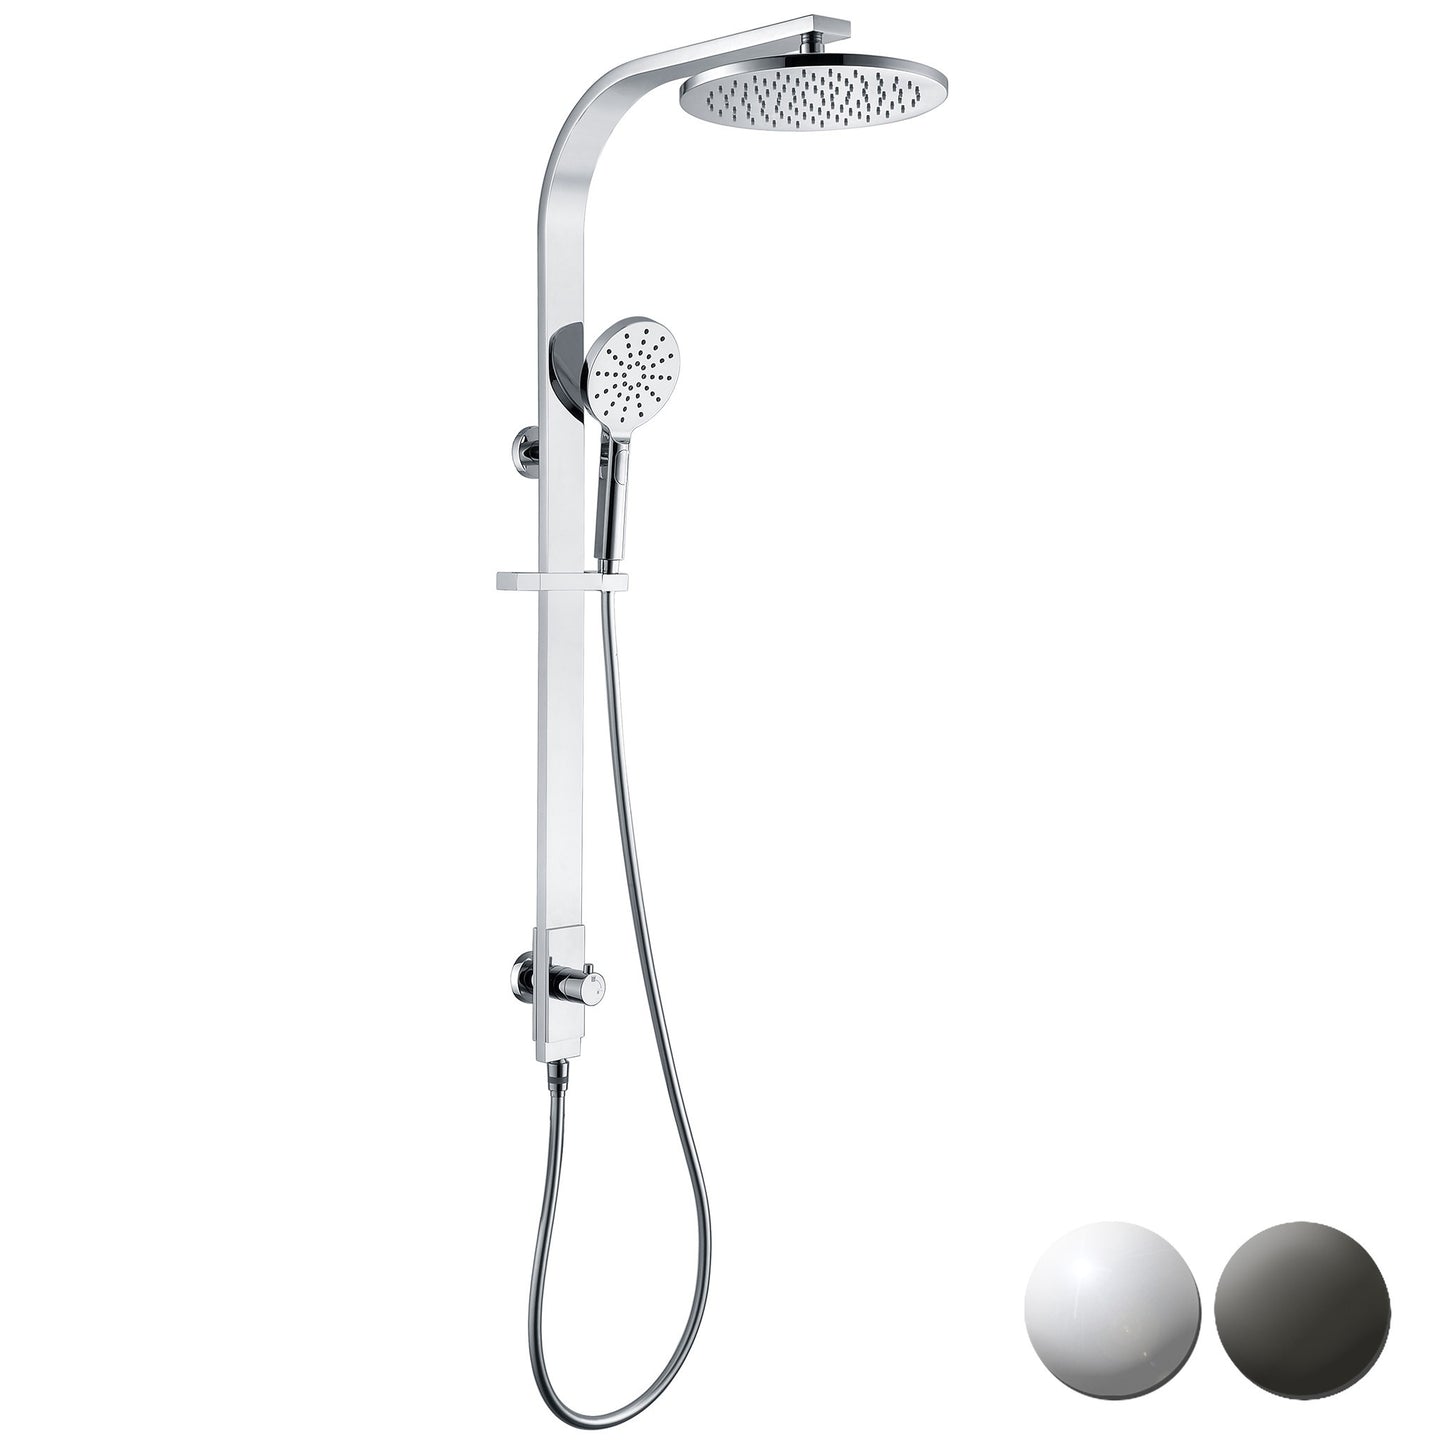 Kara Combination Shower with Multifunction Hand Shower By Ikon